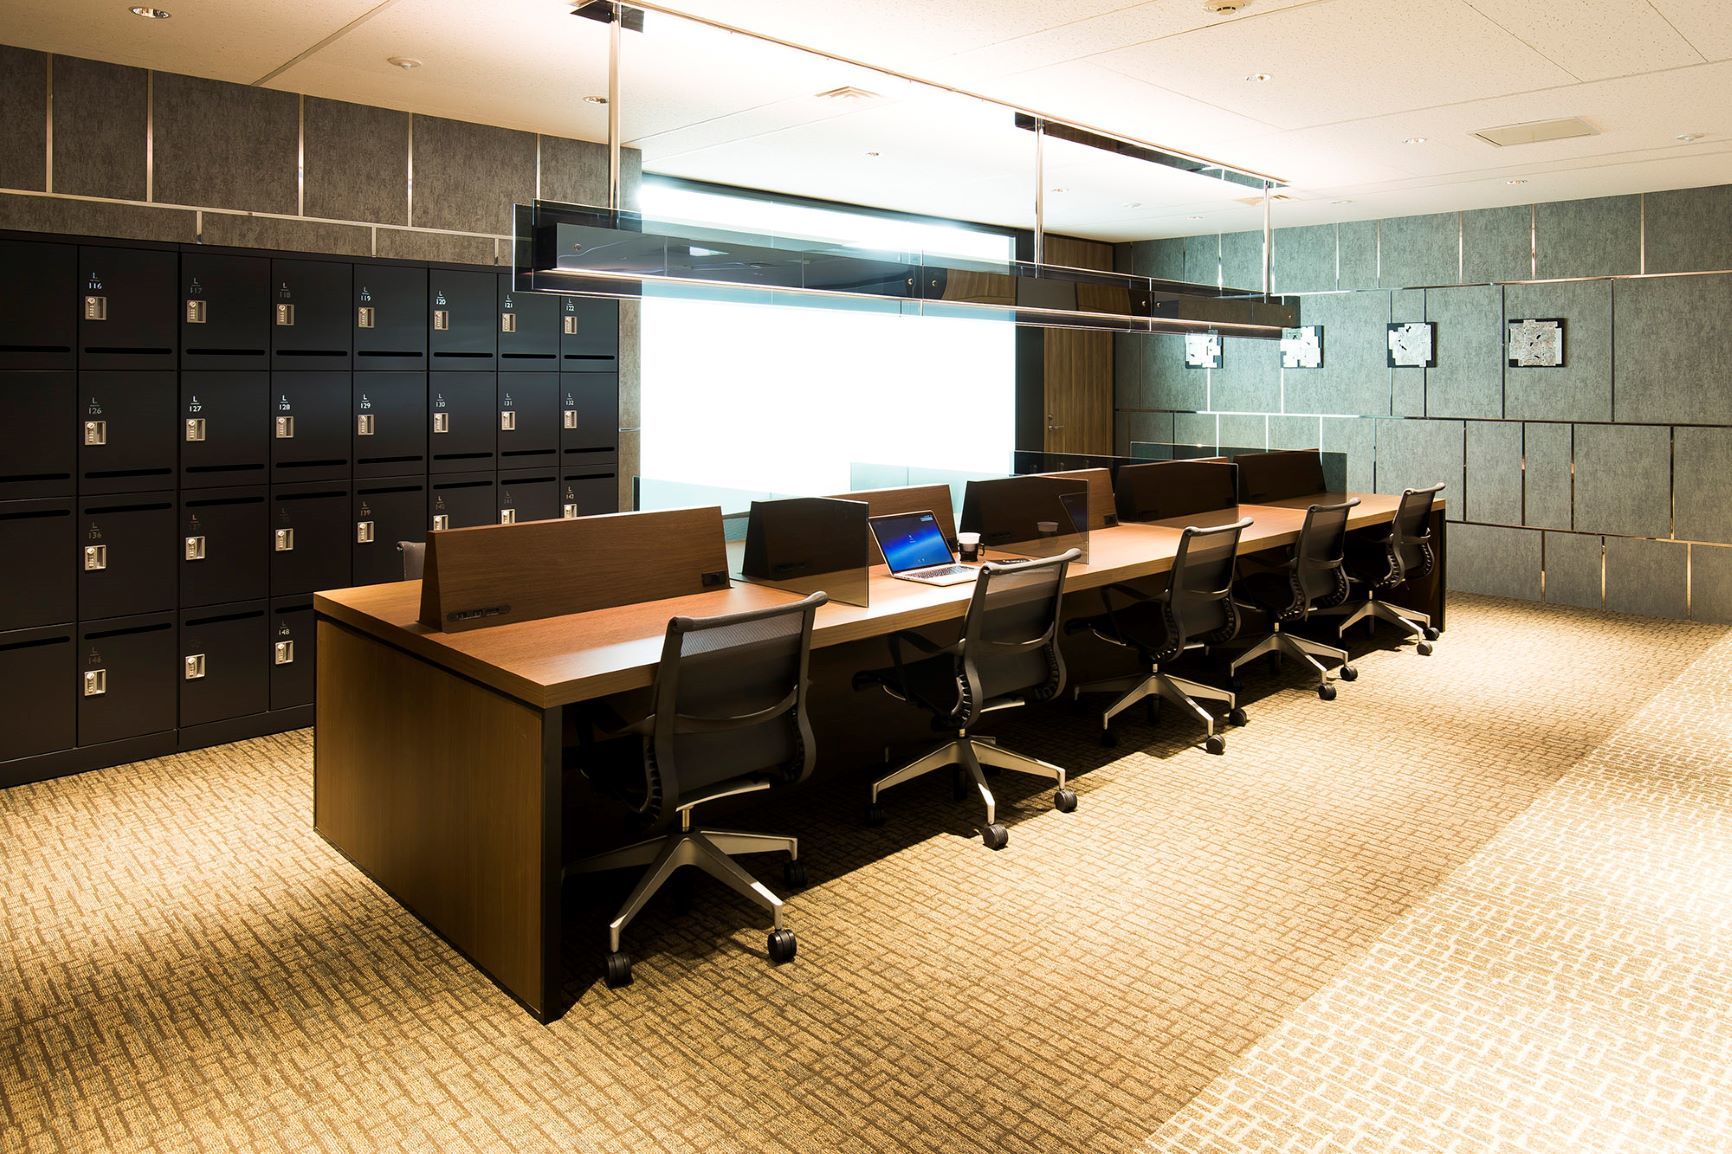 Dedicated shared desks_Shared desks available 24 hours a day, allowing you to concentrate on your work.